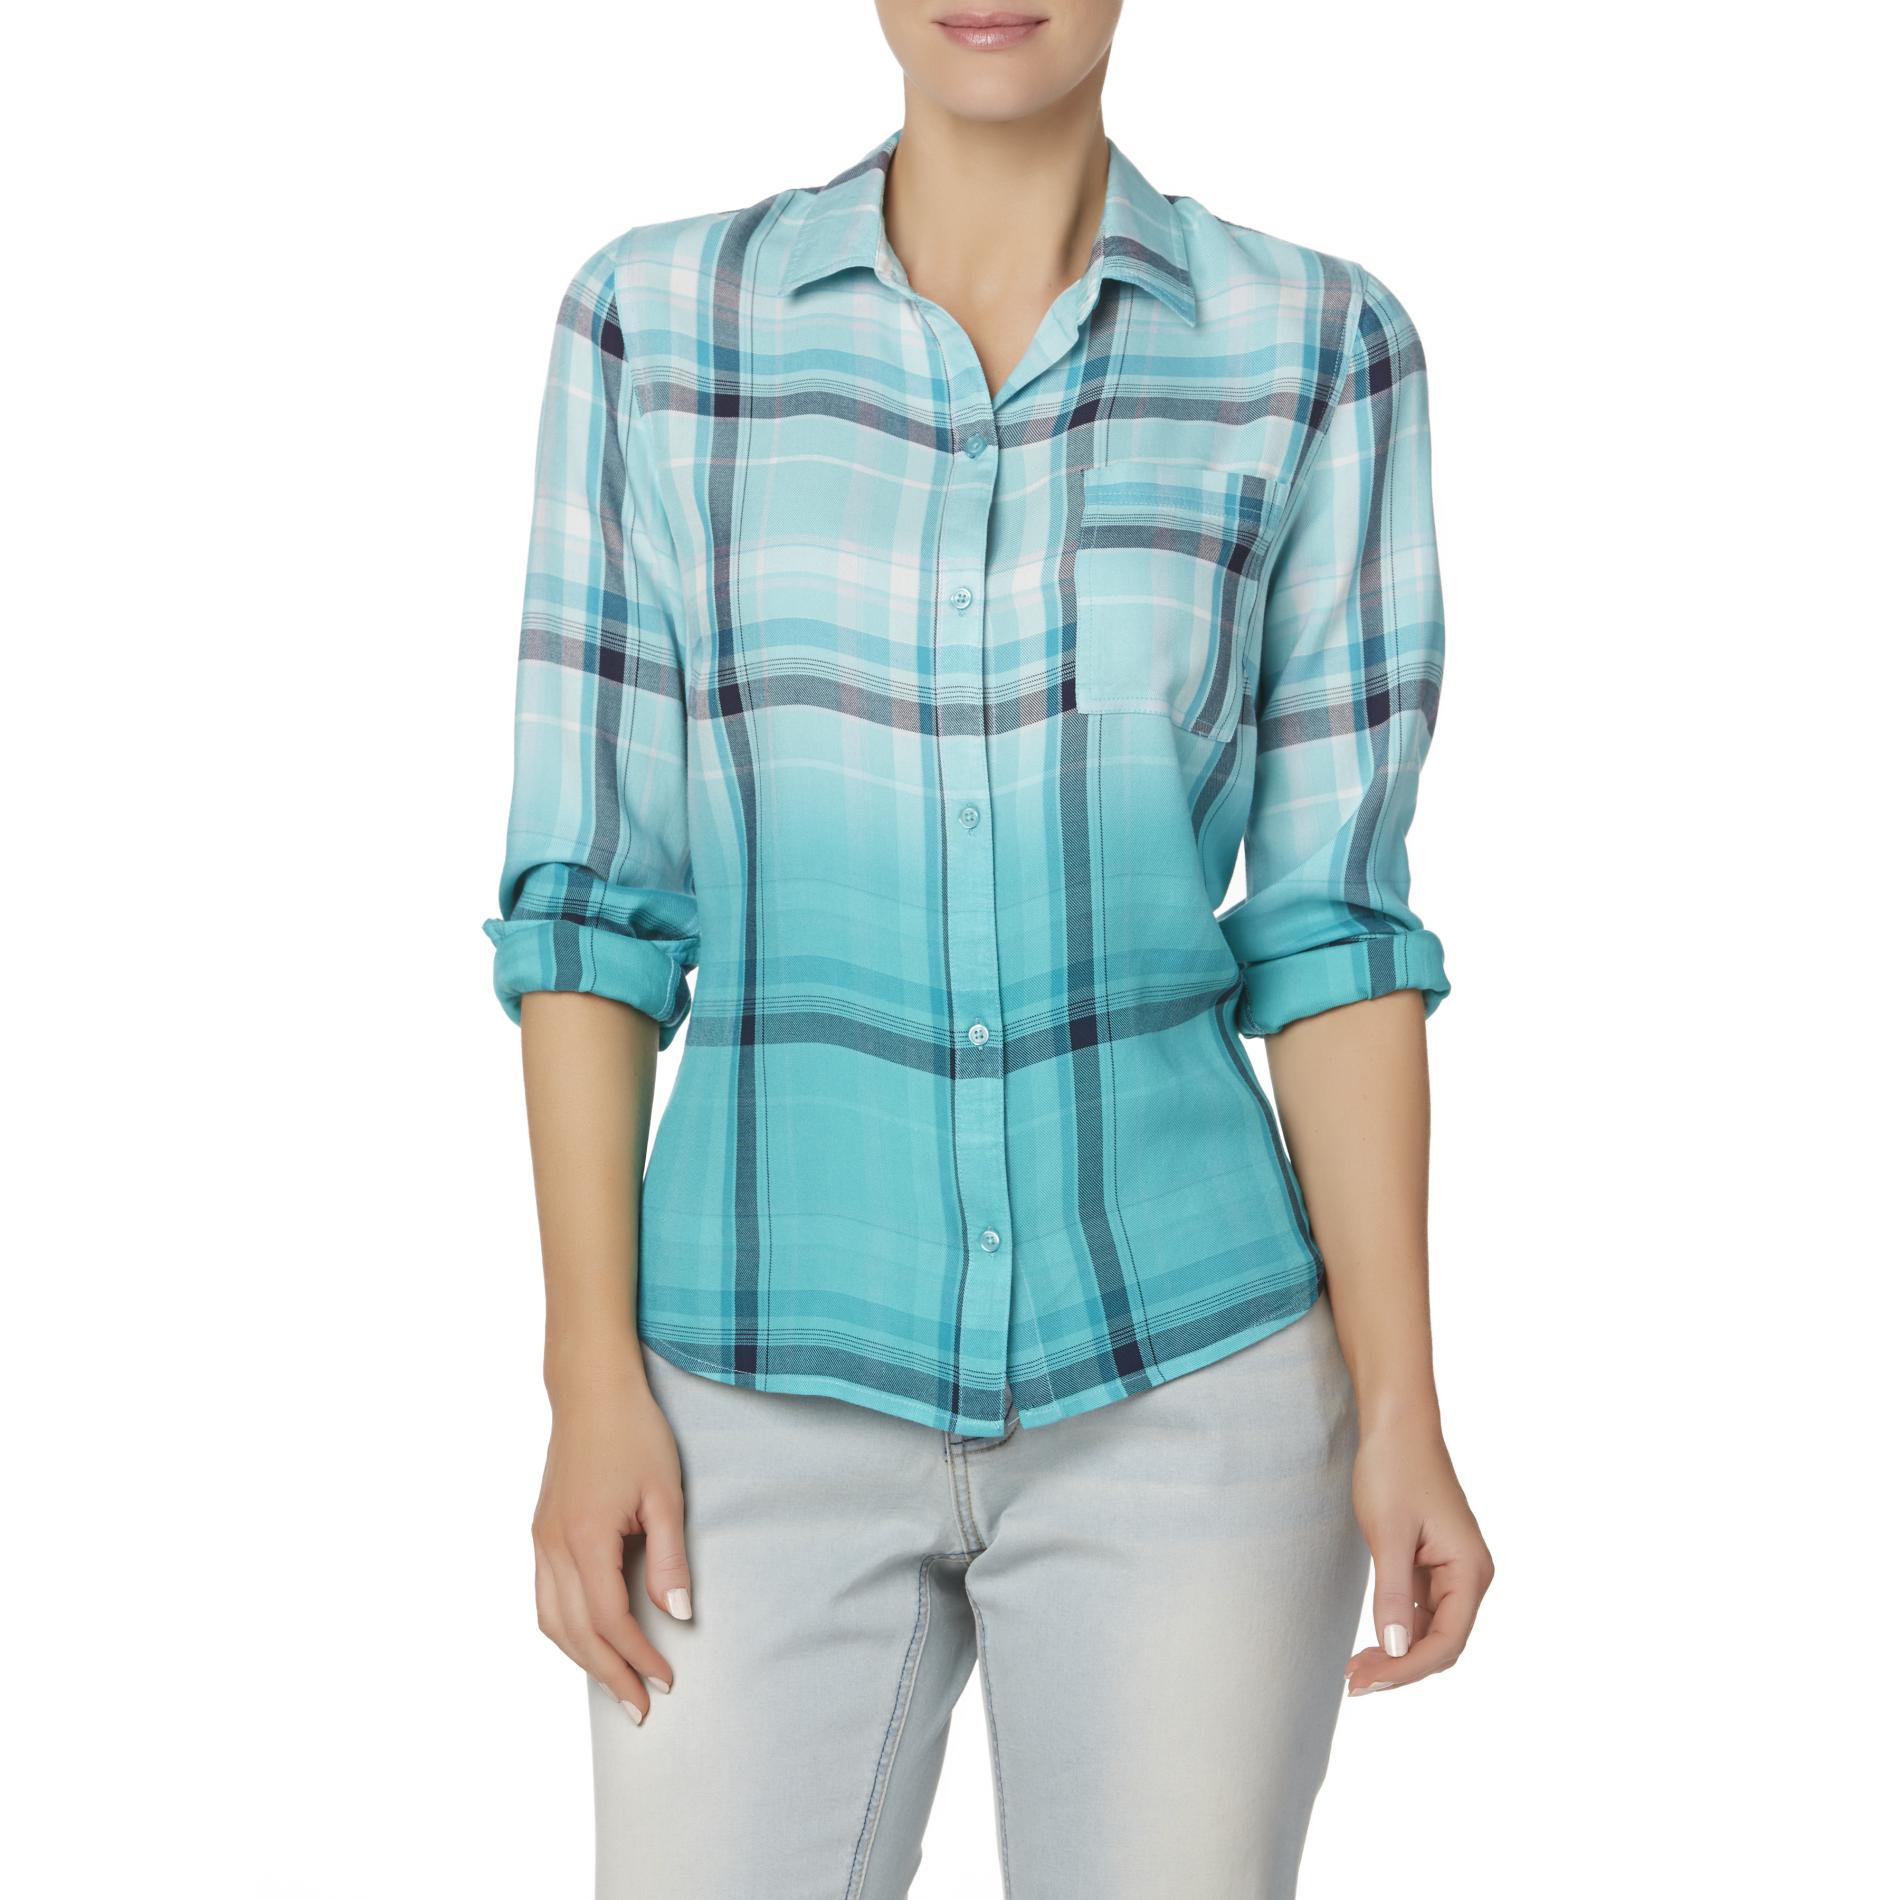 Simply Styled Women's Button-Front Shirt - Plaid